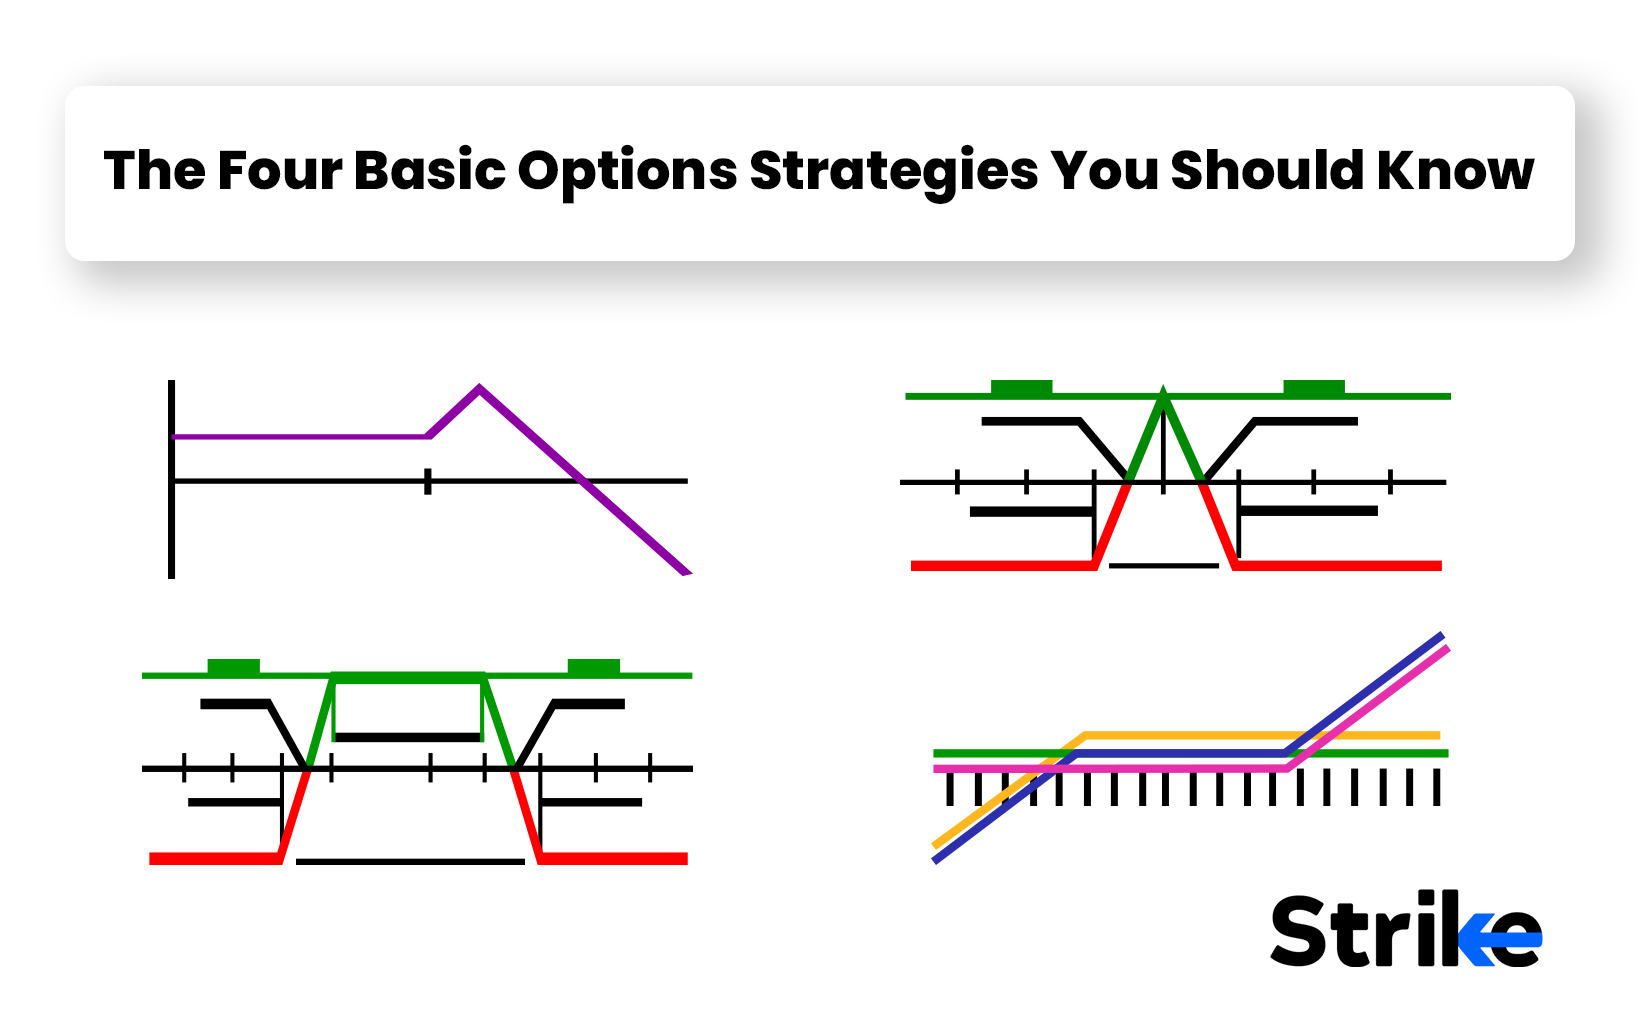 The Four Basic Options Strategies You Should Know